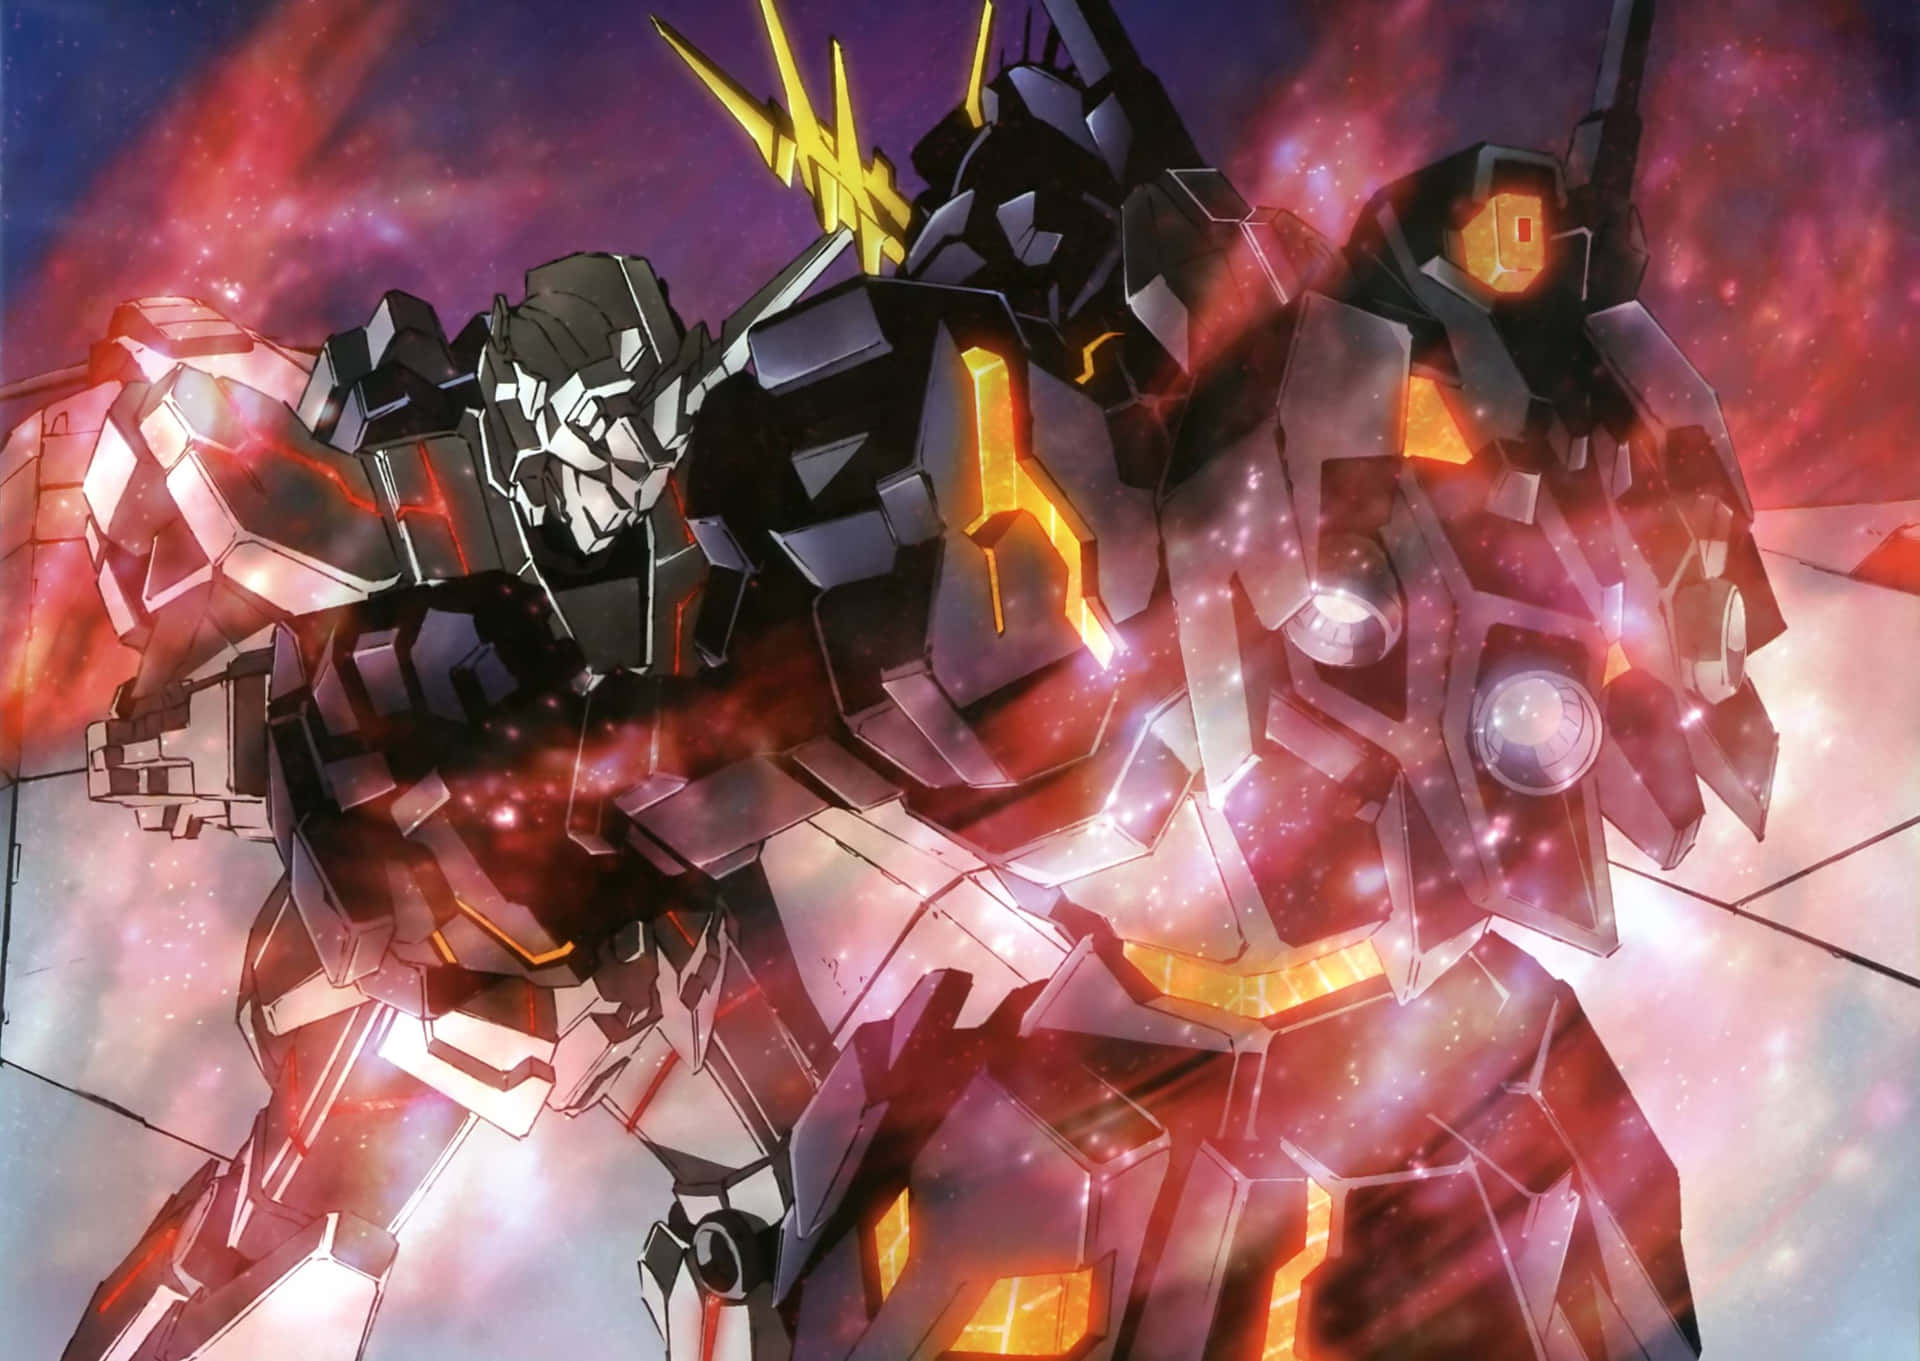 "The Beam of Judgement: Discovering a New Universe with the Gundam Unicorn" Wallpaper